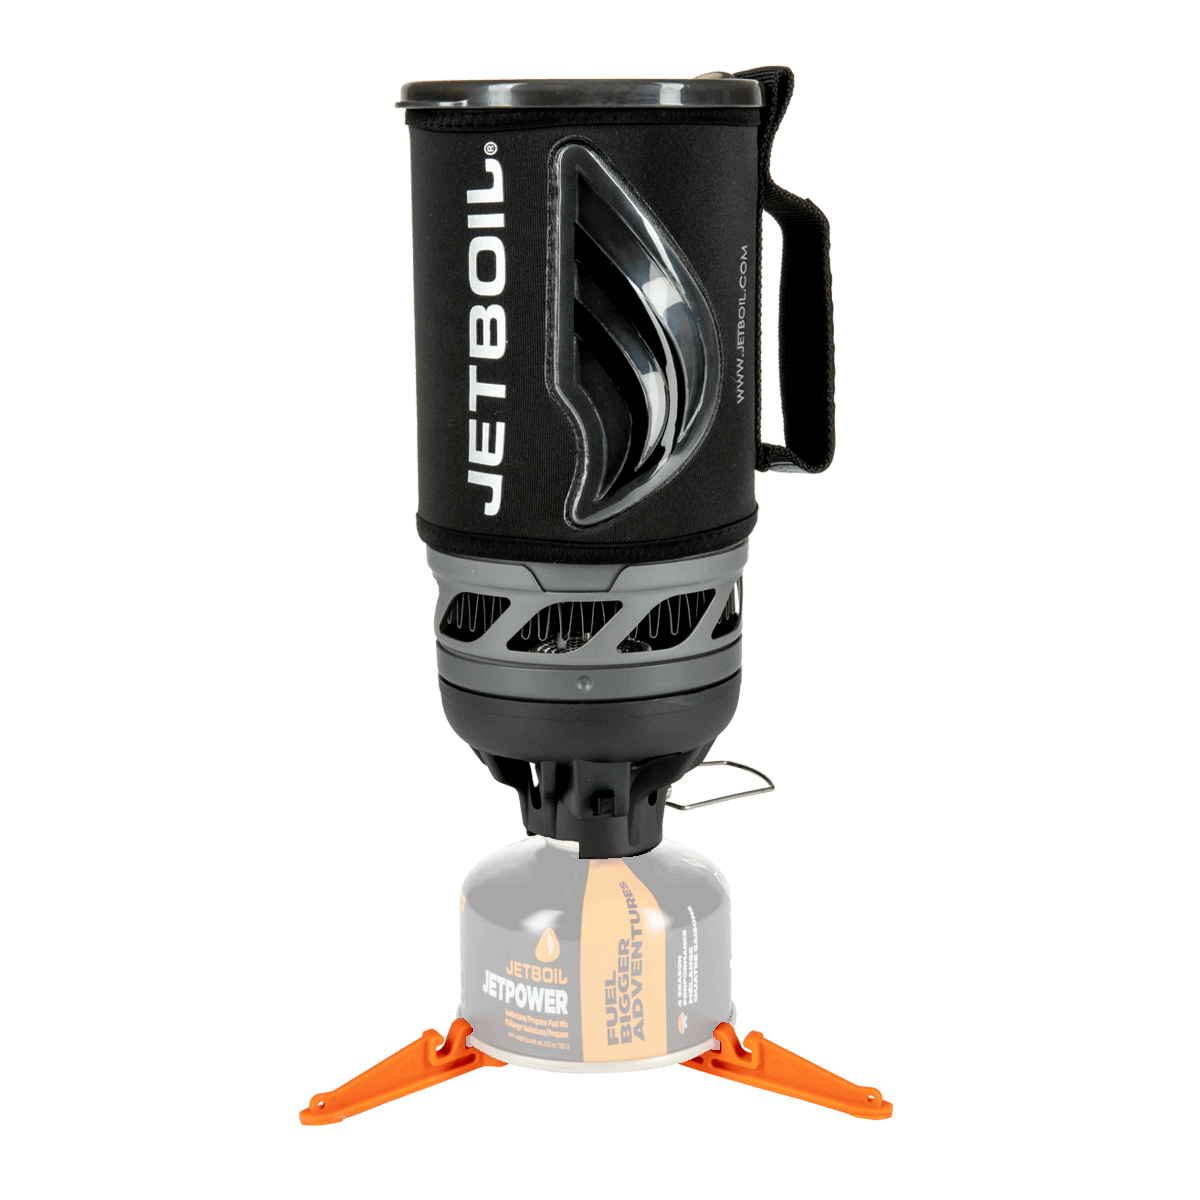 Carbon Black Jetboil Zip Compact Camping Cooking System Camping Stove Gas New 